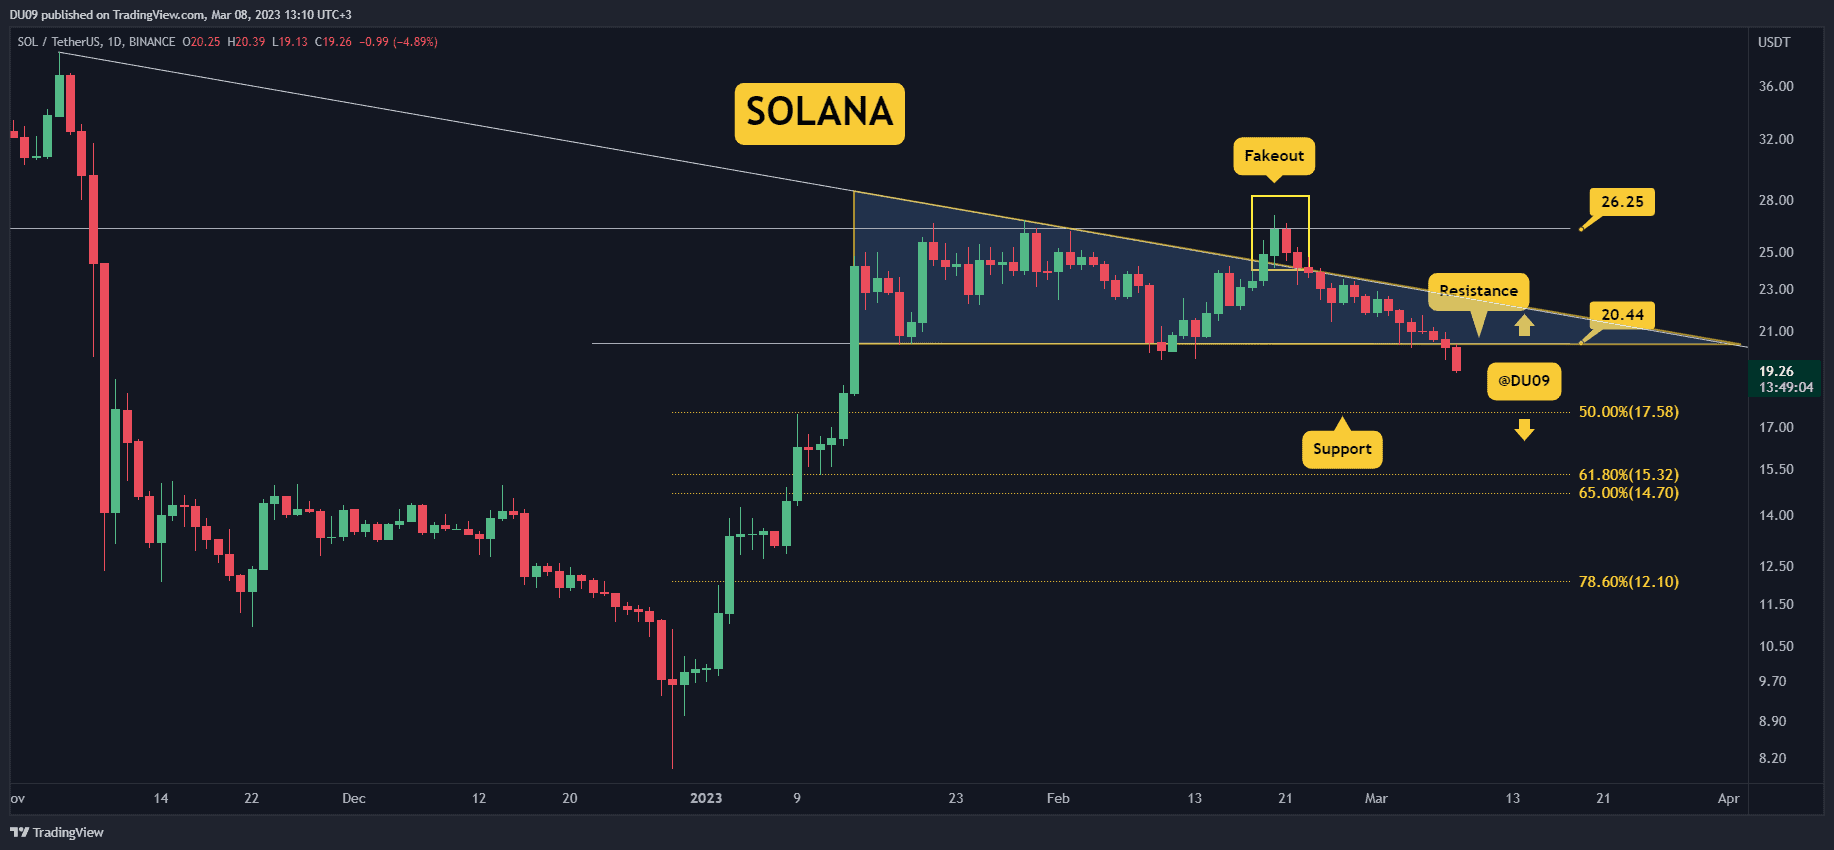 Sol-dives-7%-daily,-is-$15-the-next-big-target?-(solana-price-analysis)